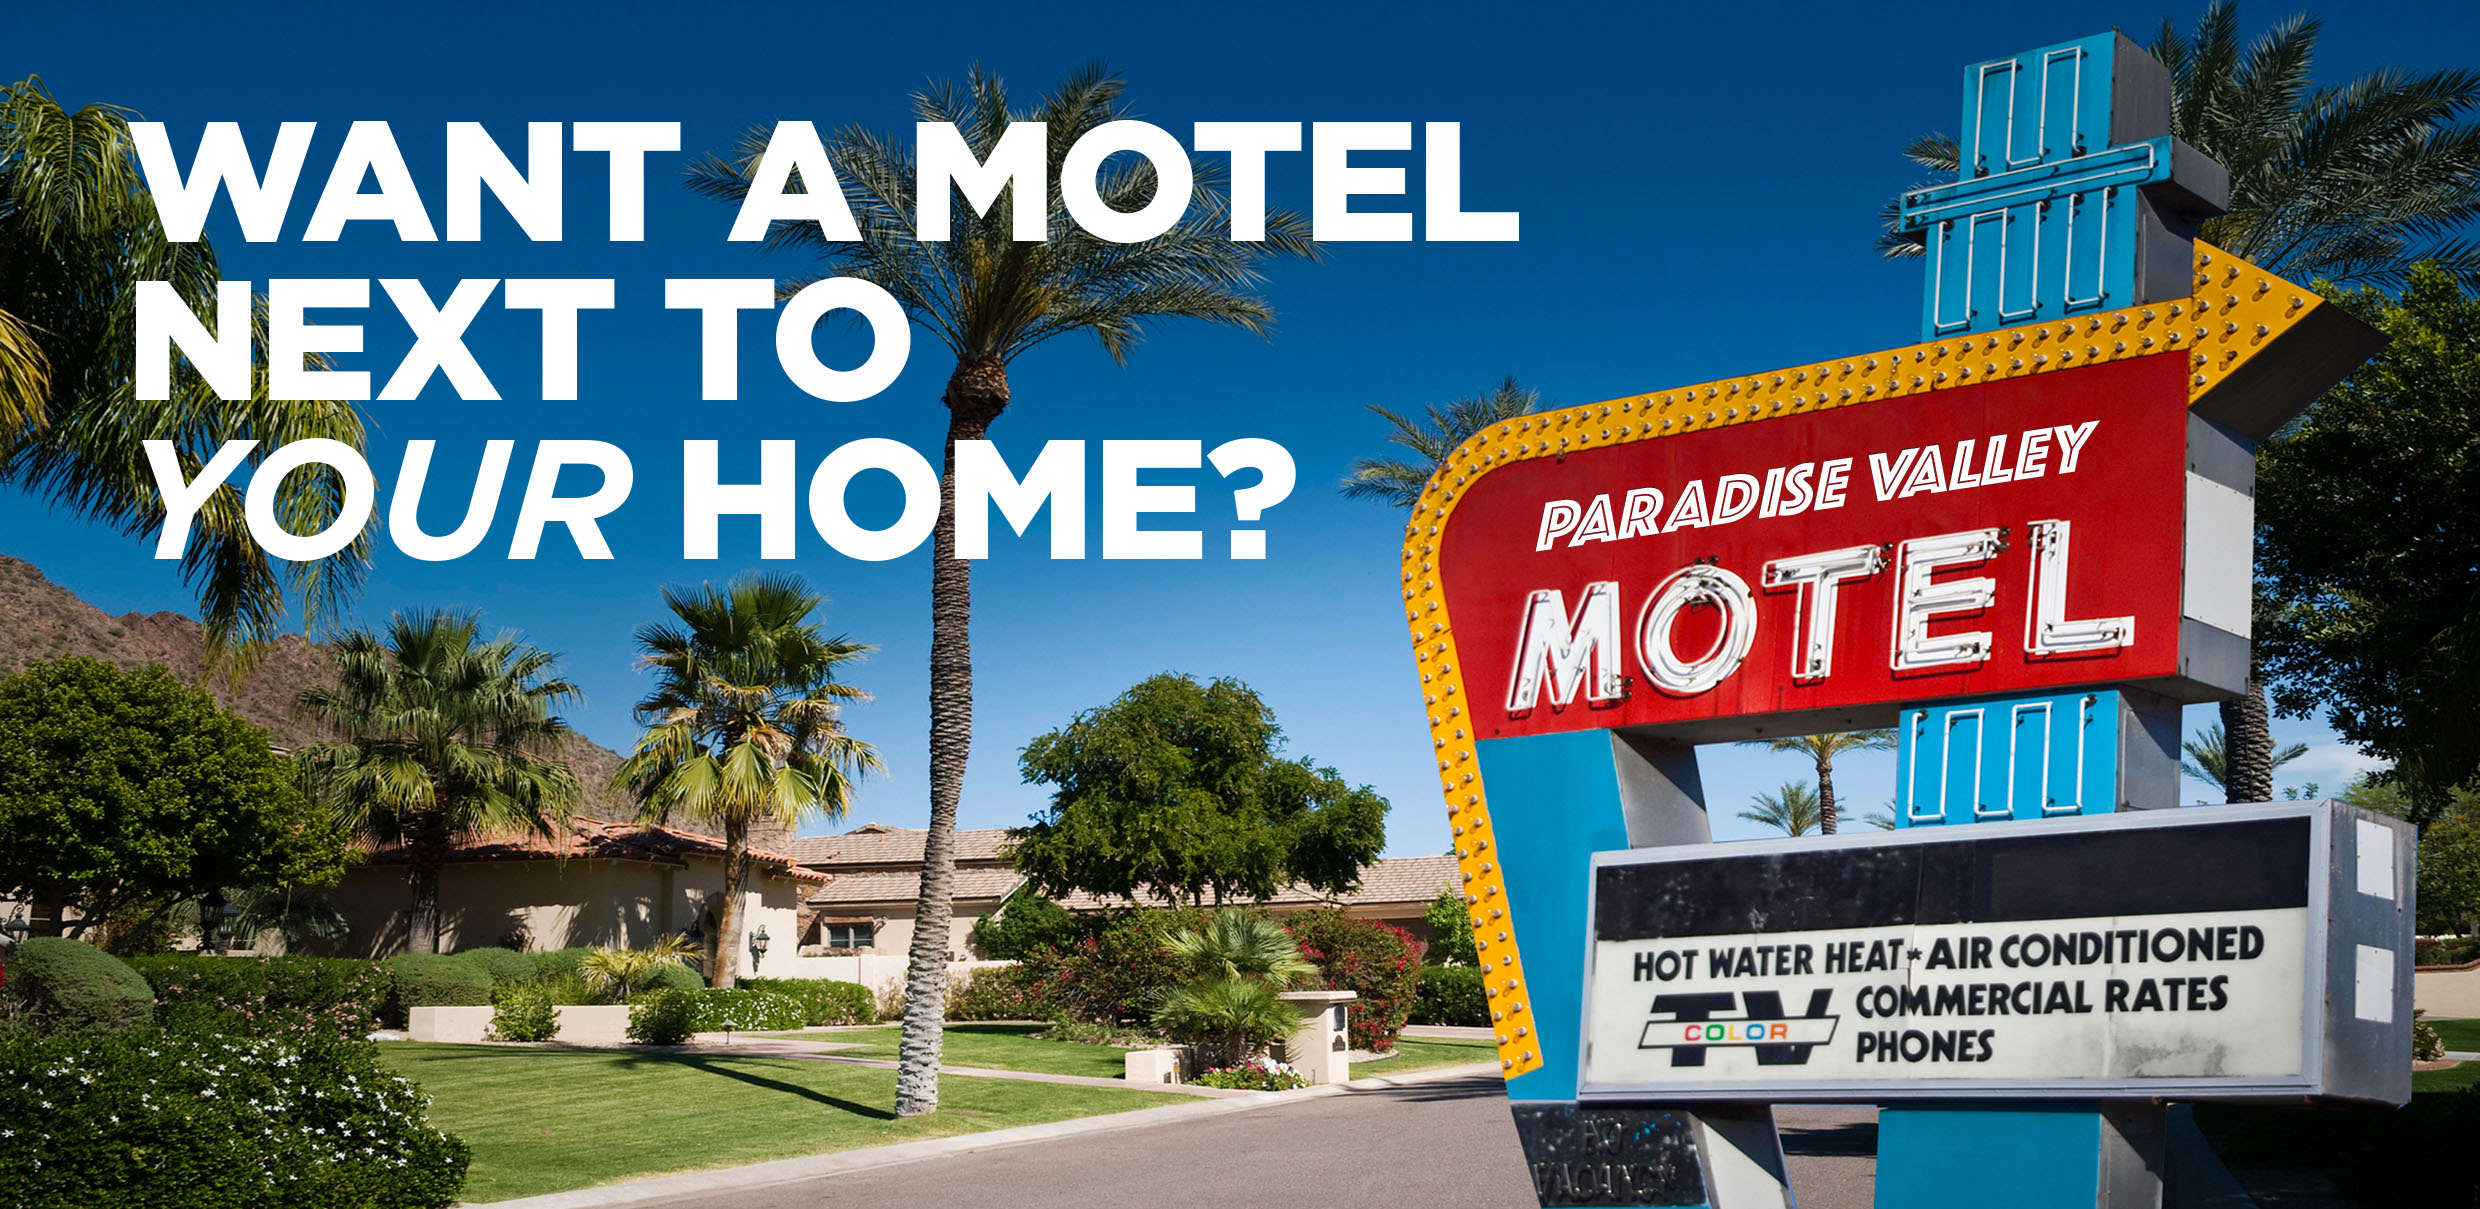 You are currently viewing Want a Motel Next to Your Home?